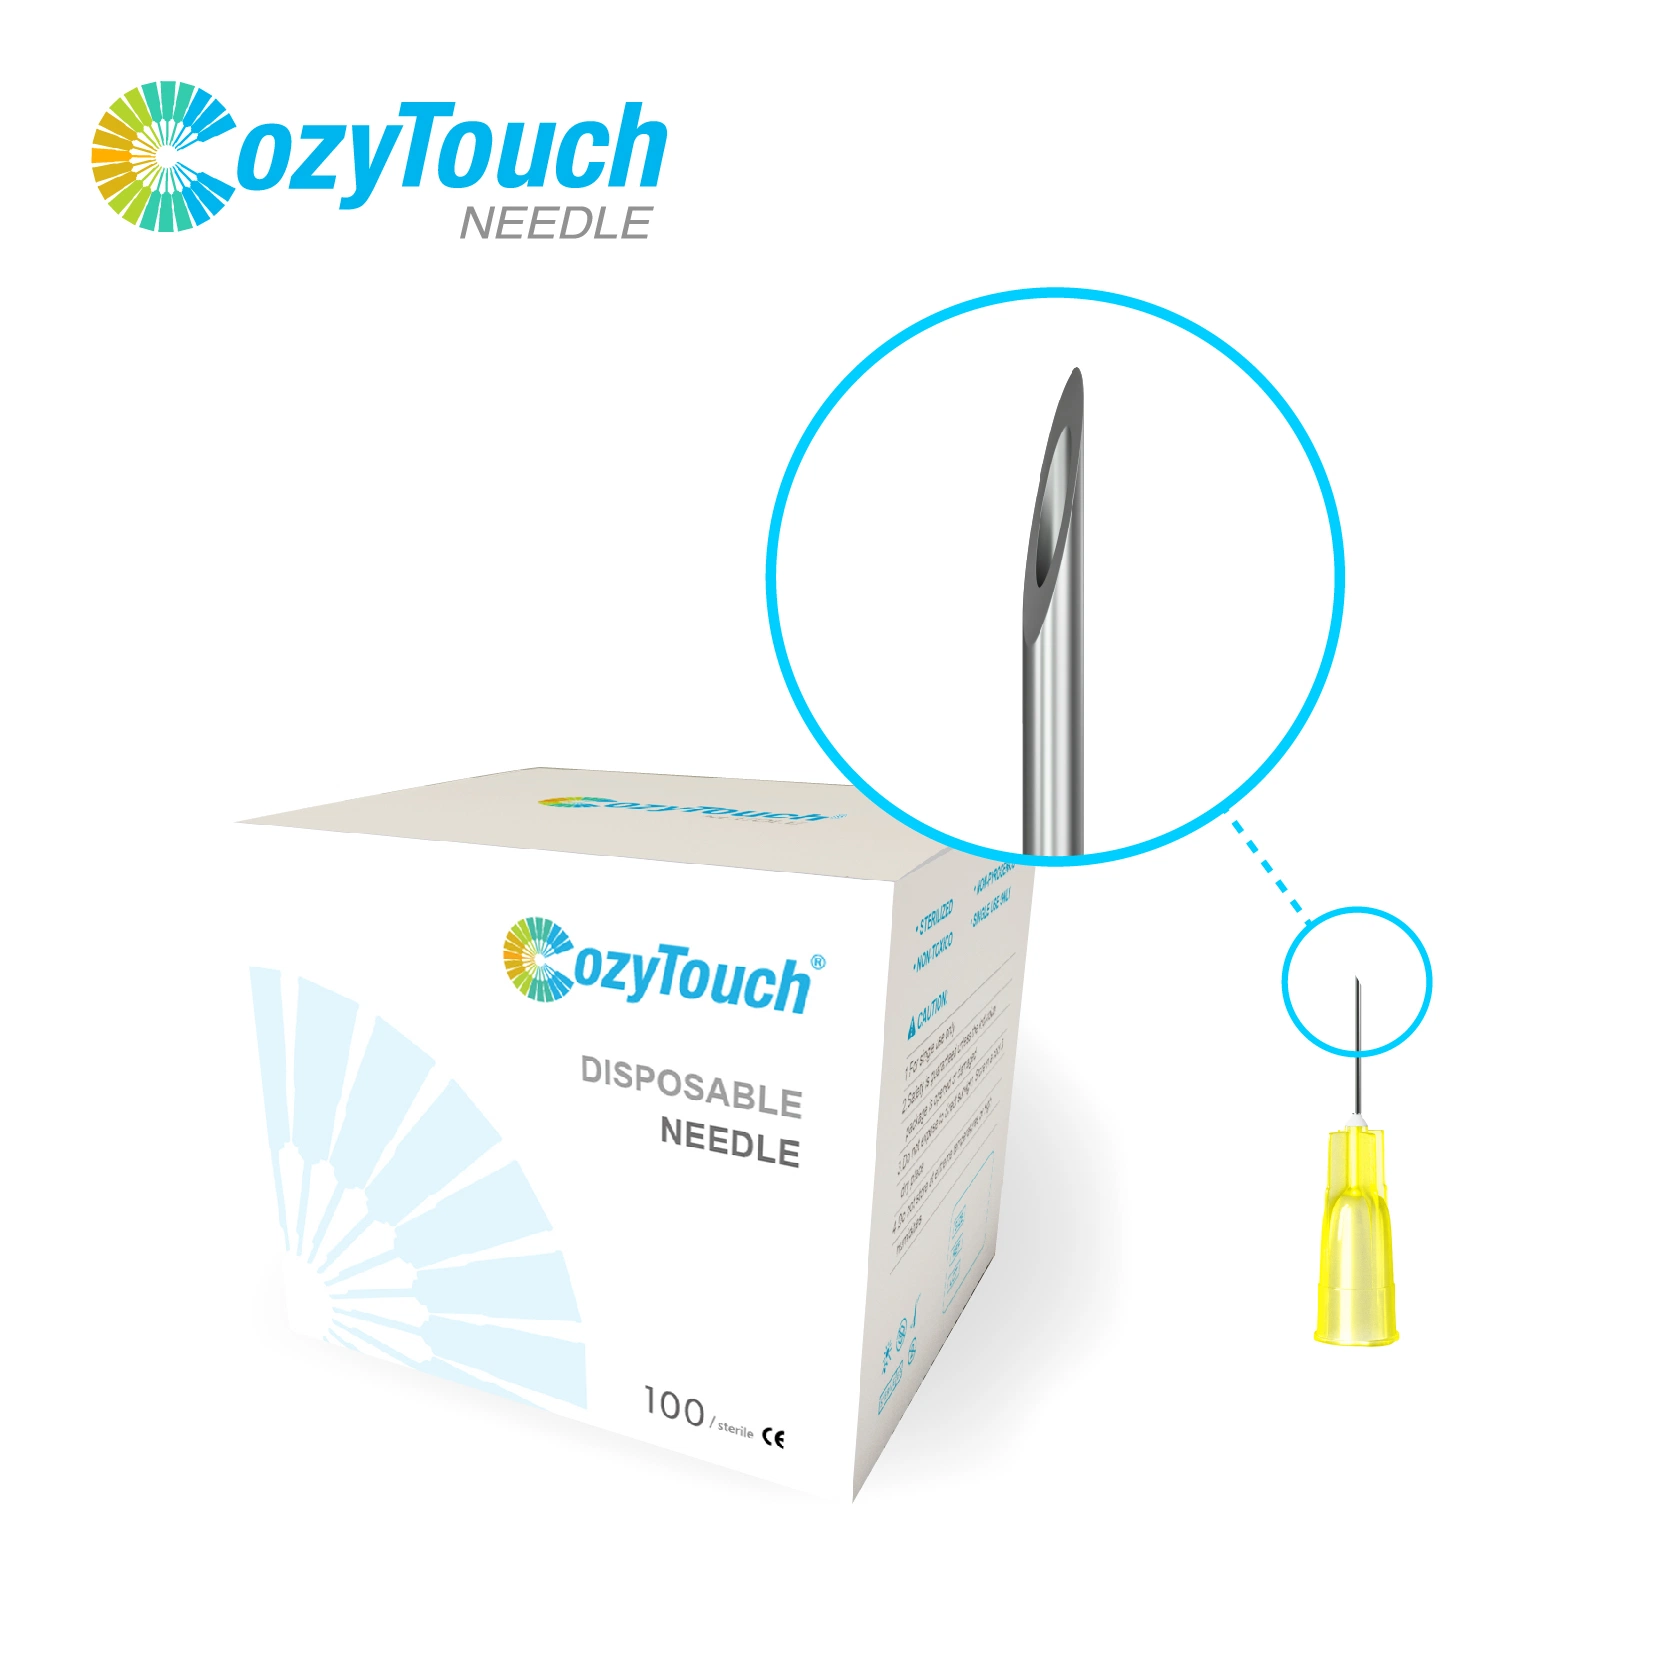 Cozytouch Disposable Face and Body Mesotherapy Needle Injection 30g X 4mm Stainless Steel Meso Needles